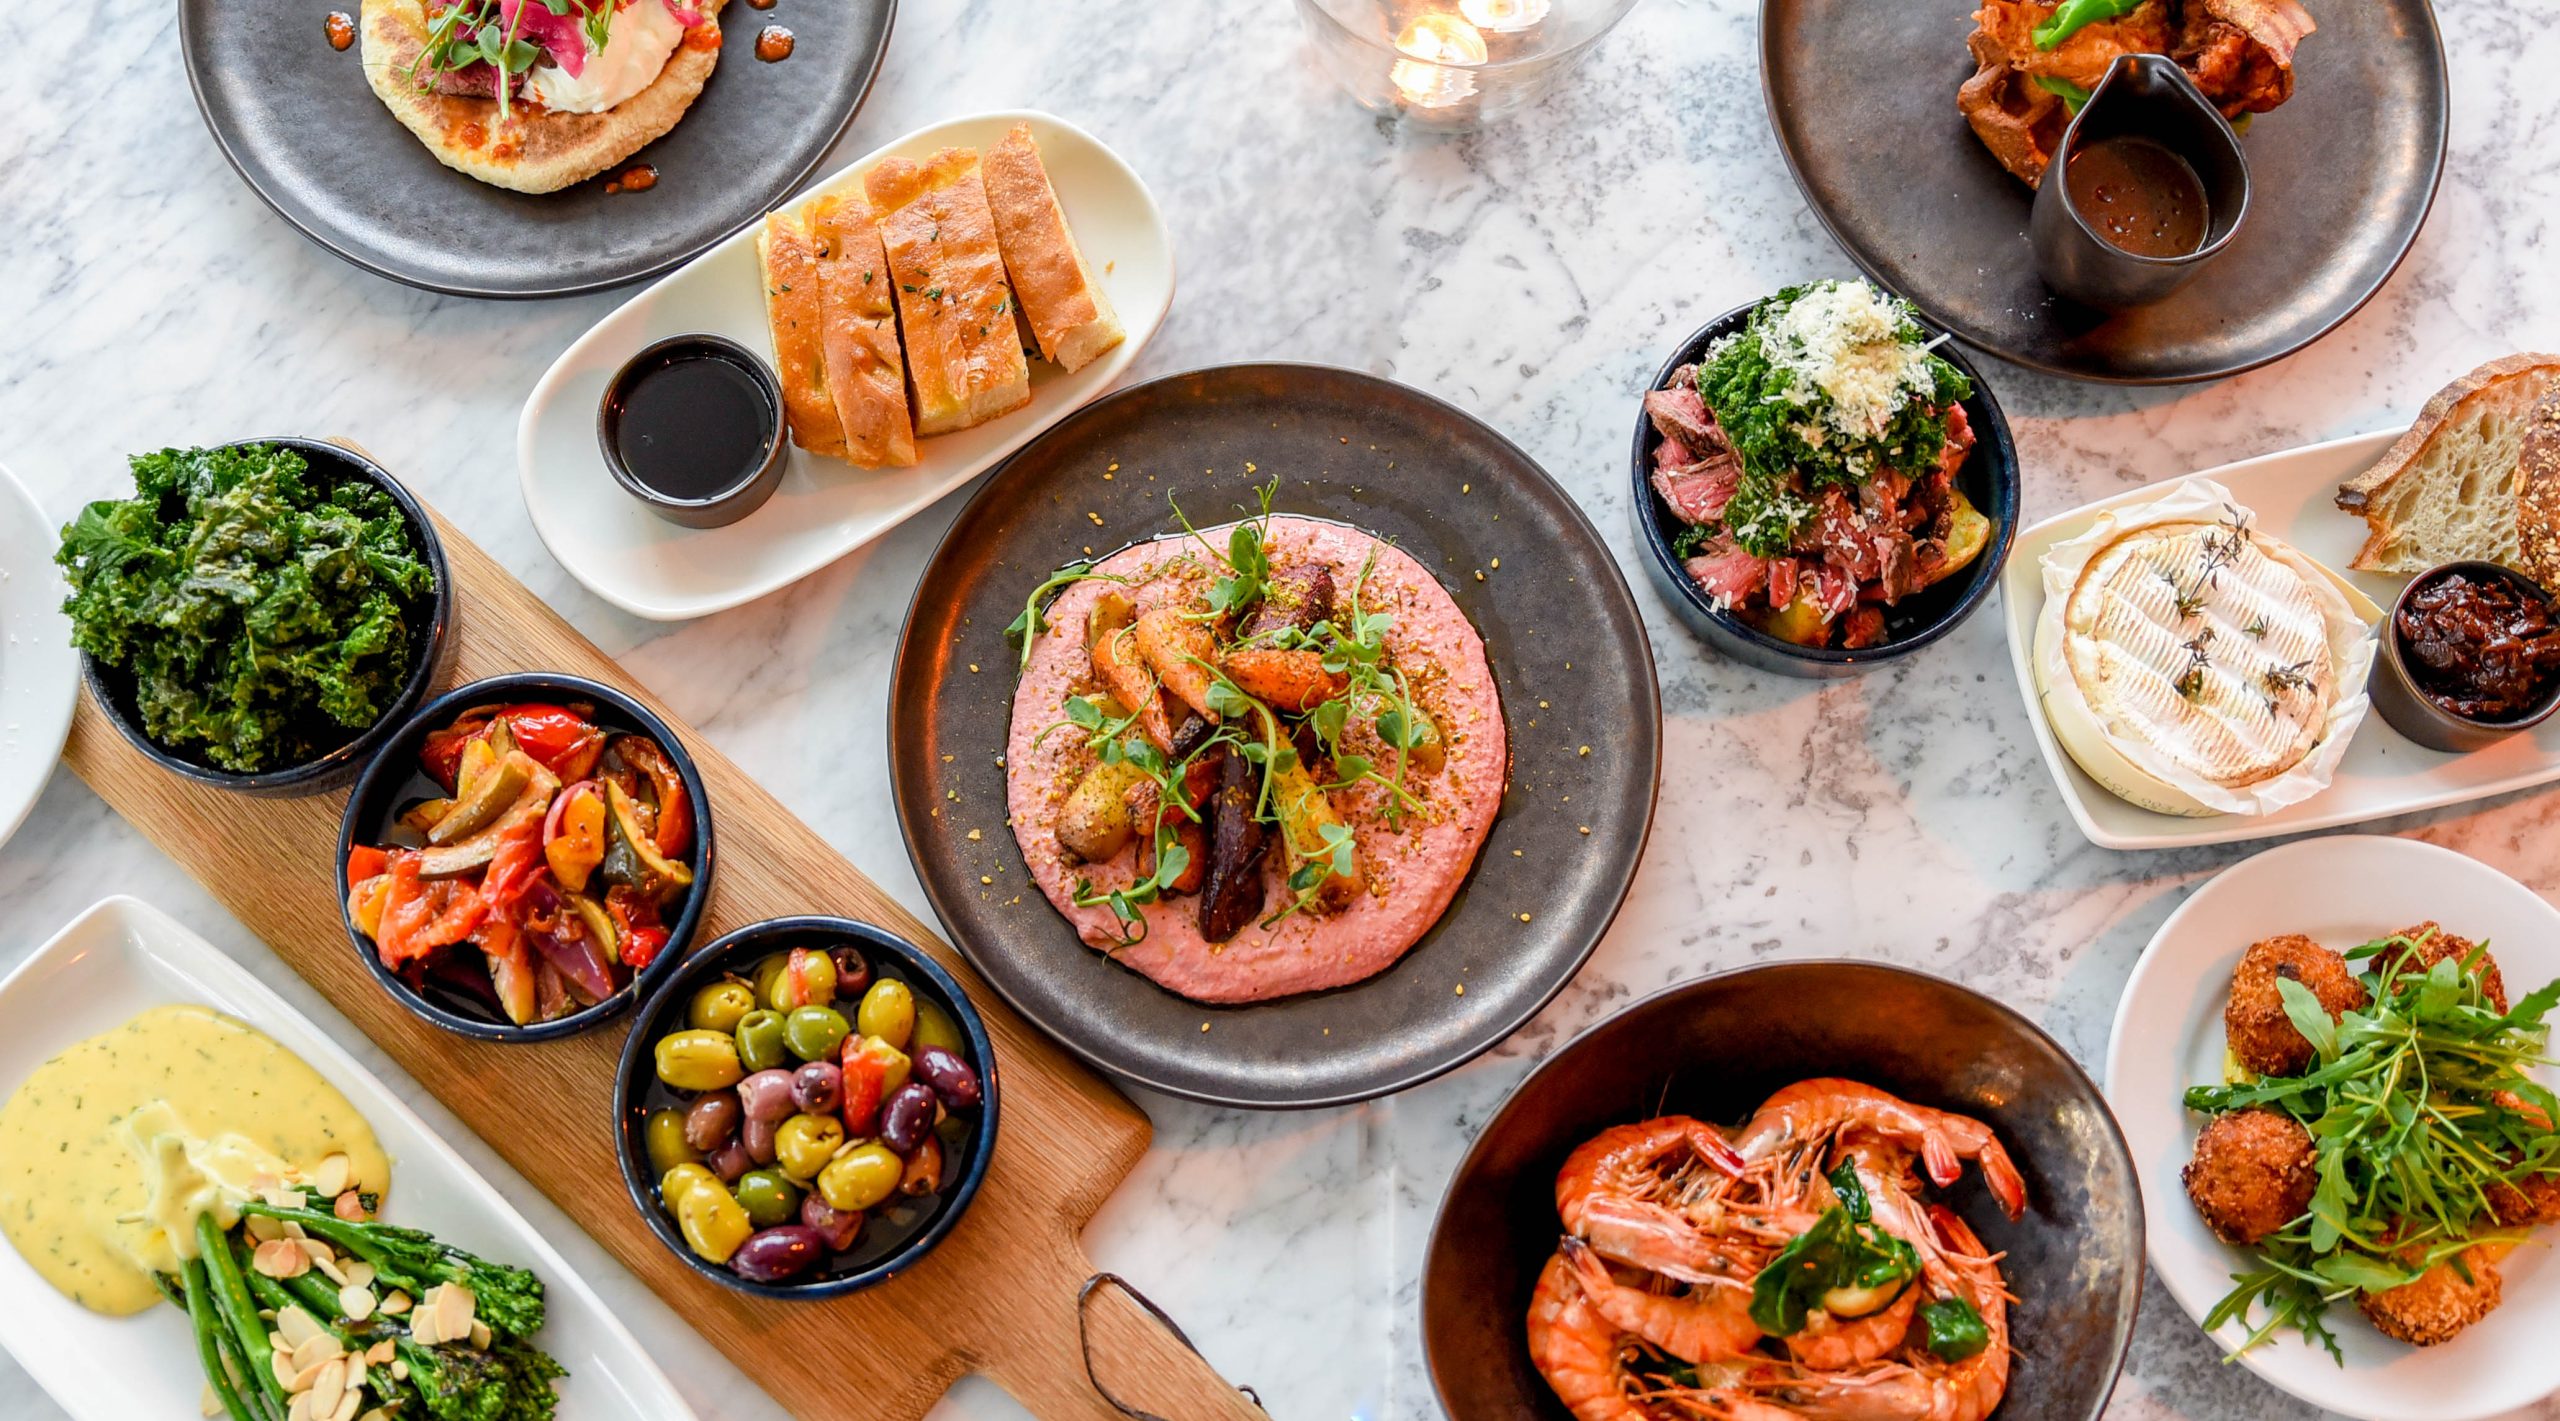 FEATURED | The Courtyard is introducing Bottomless Small Plates events, taking place every Thursday evening this Summer